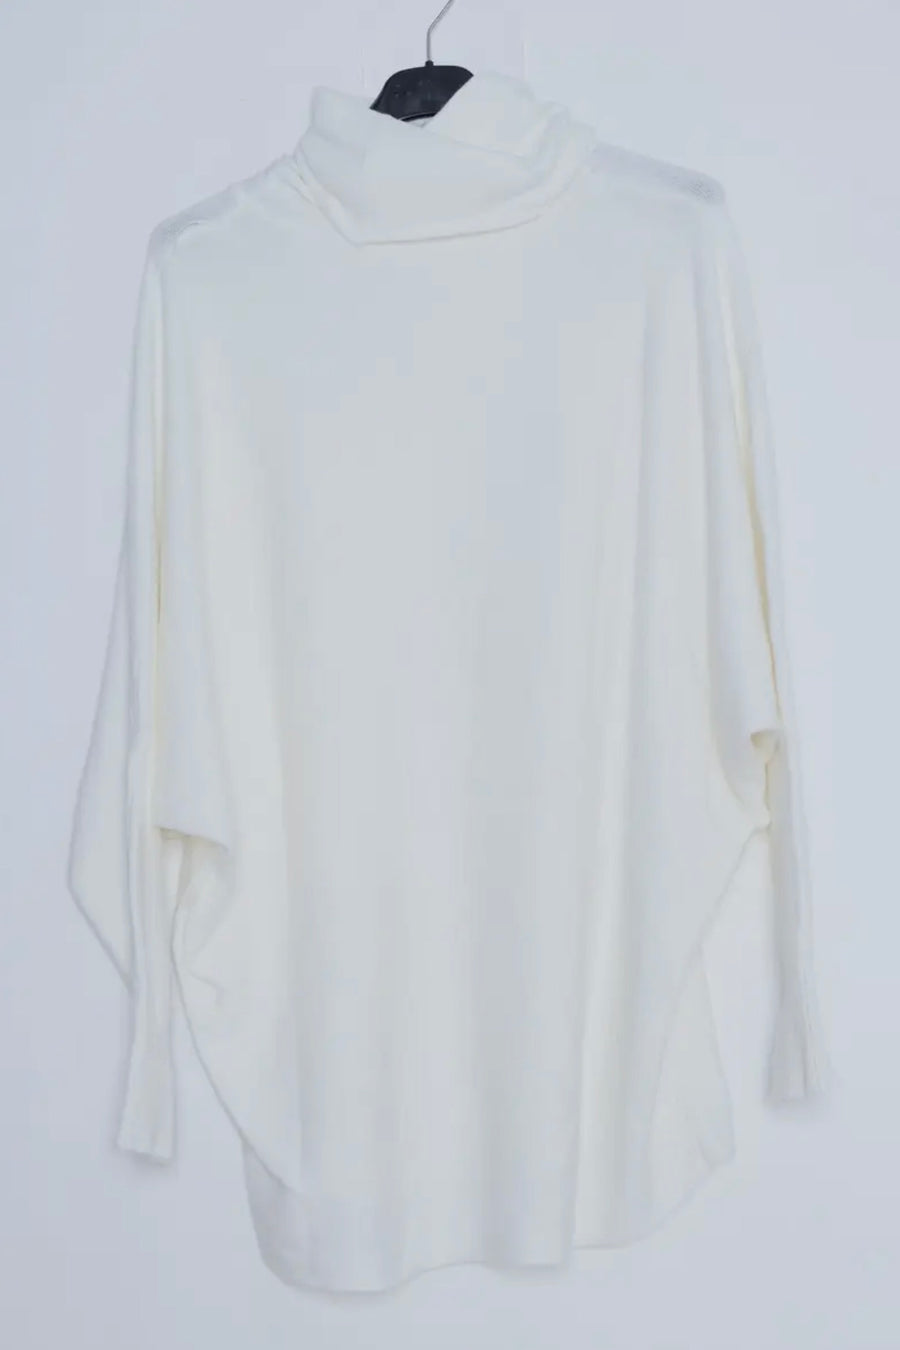 Cashmere Blend Funnel Neck Tunic Sweater